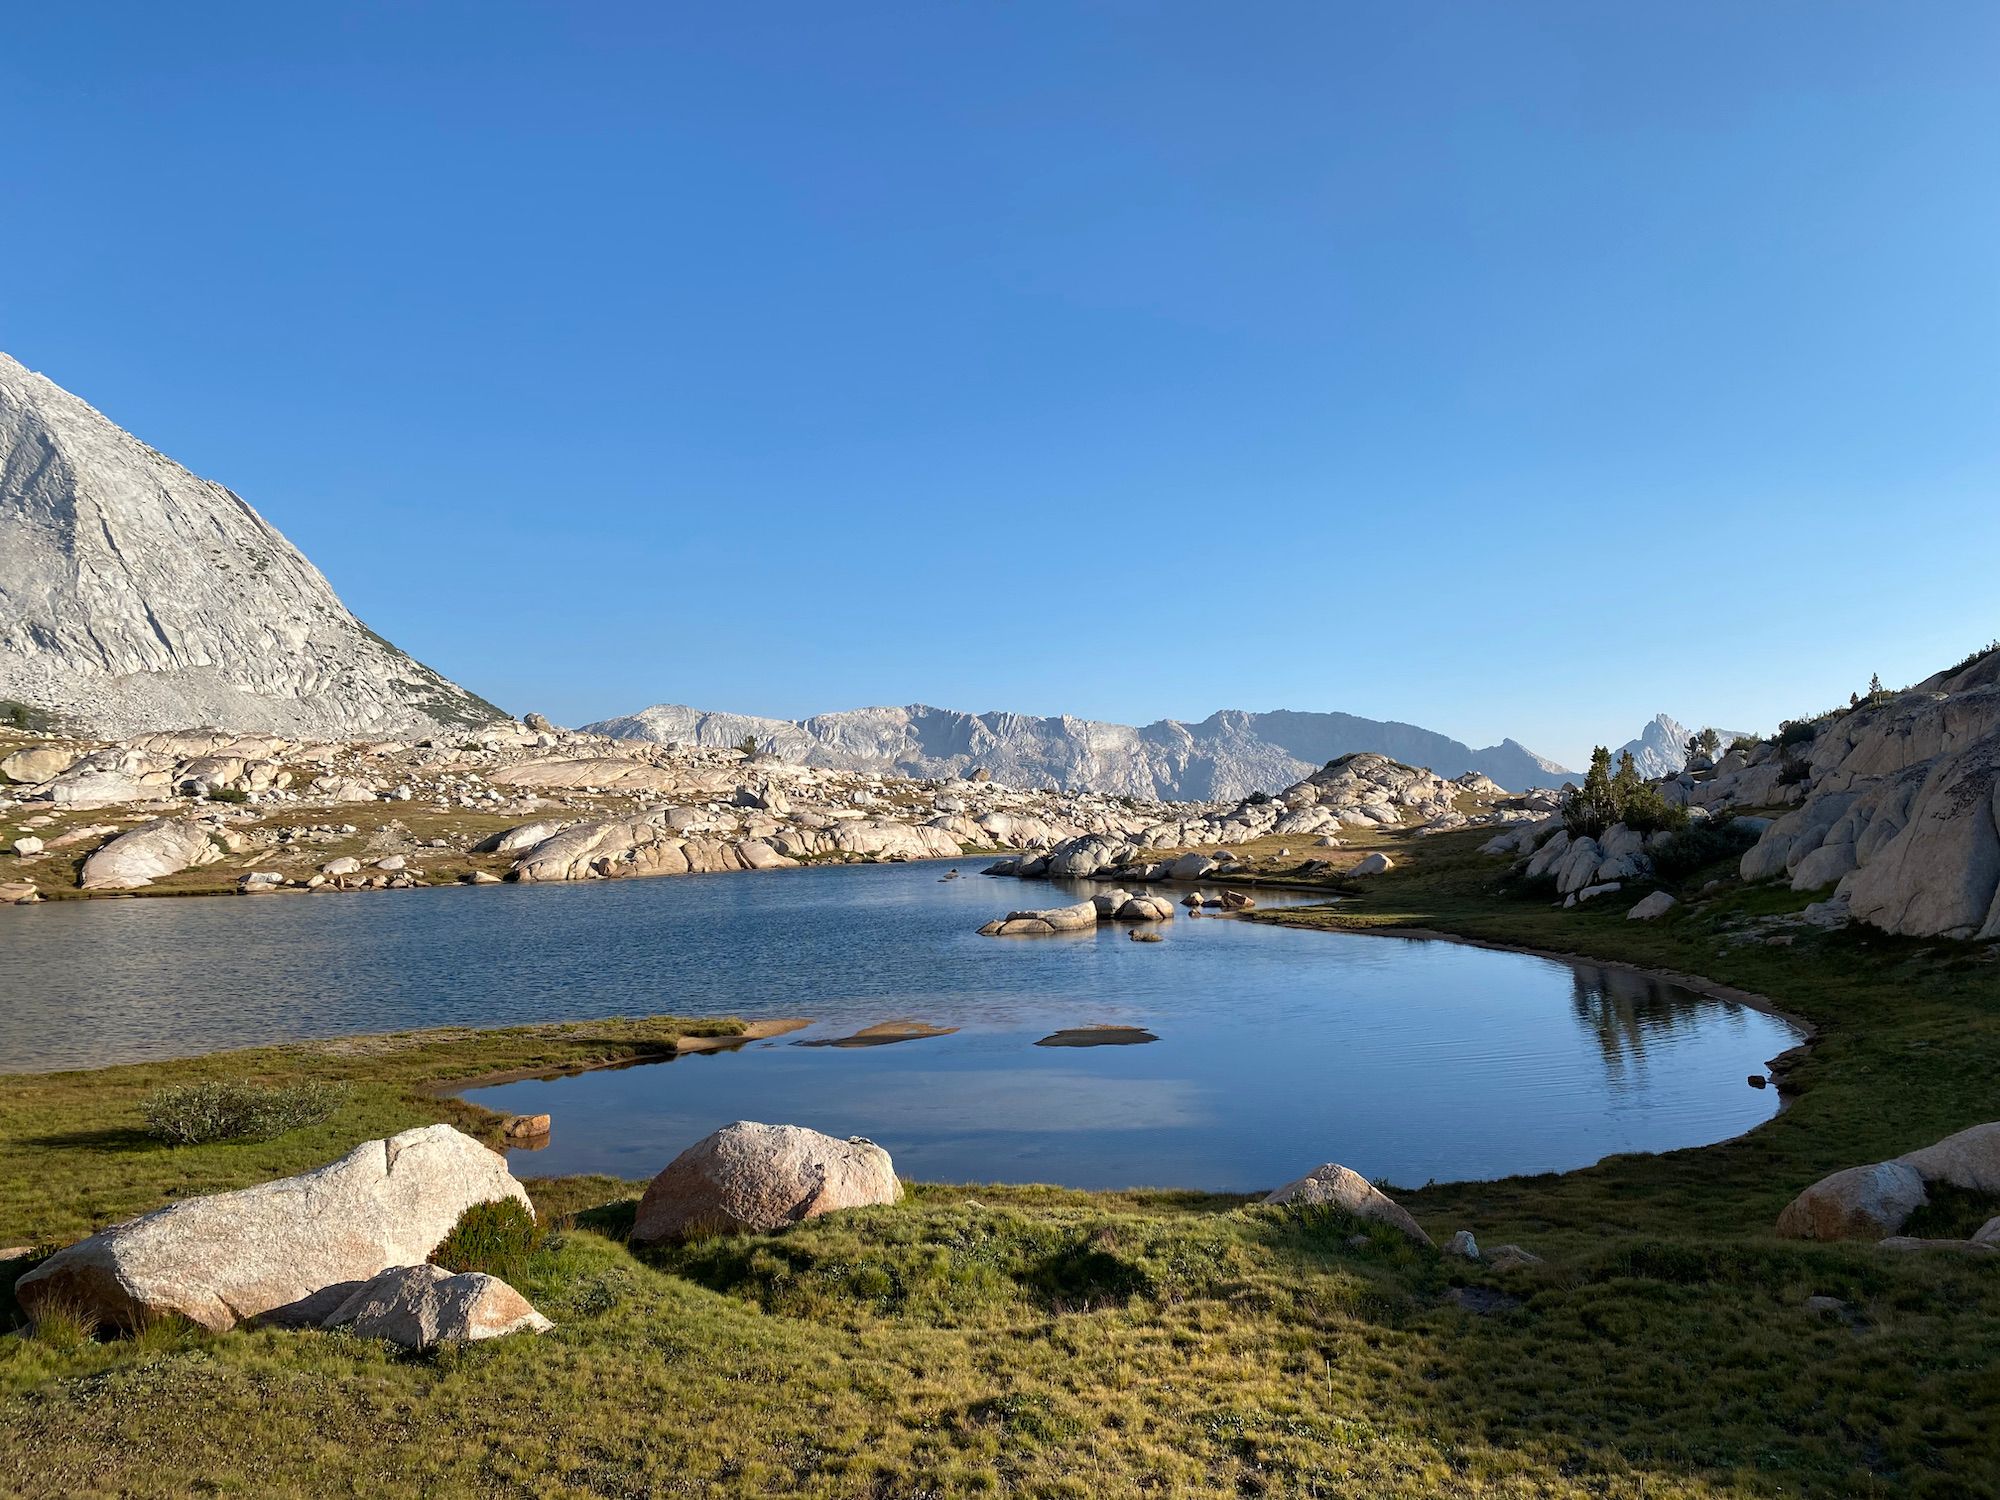 A calm lake surrounded by grassy meadows and rounded boulders.